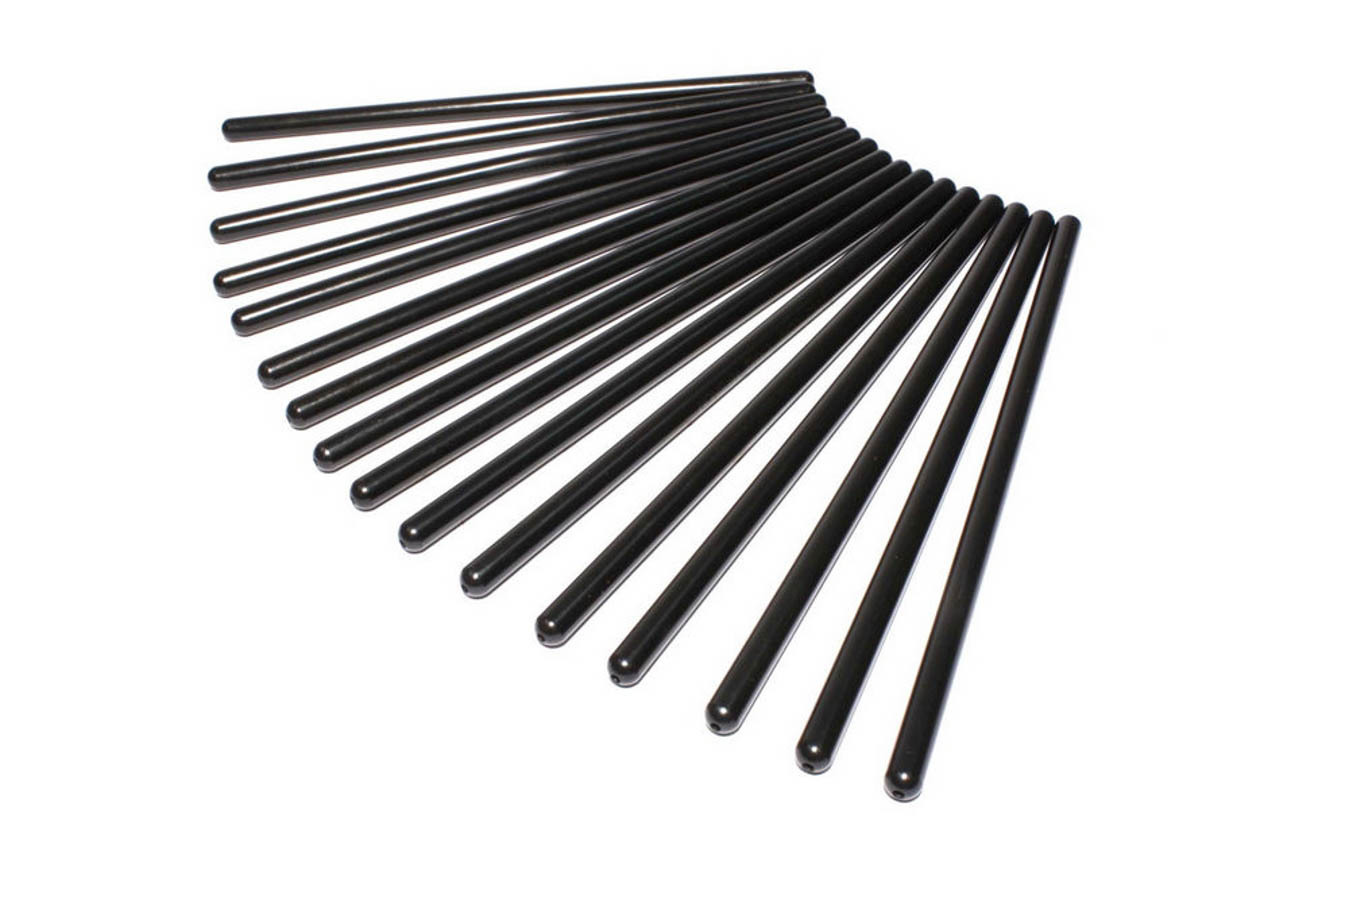 Comp Cams 7263-16 Pushrod, Magnum, 9.300 in Long, 5/16 in Diameter, 0.080 in Thick Wall, Chromoly, Pontiac V8, Set of 16